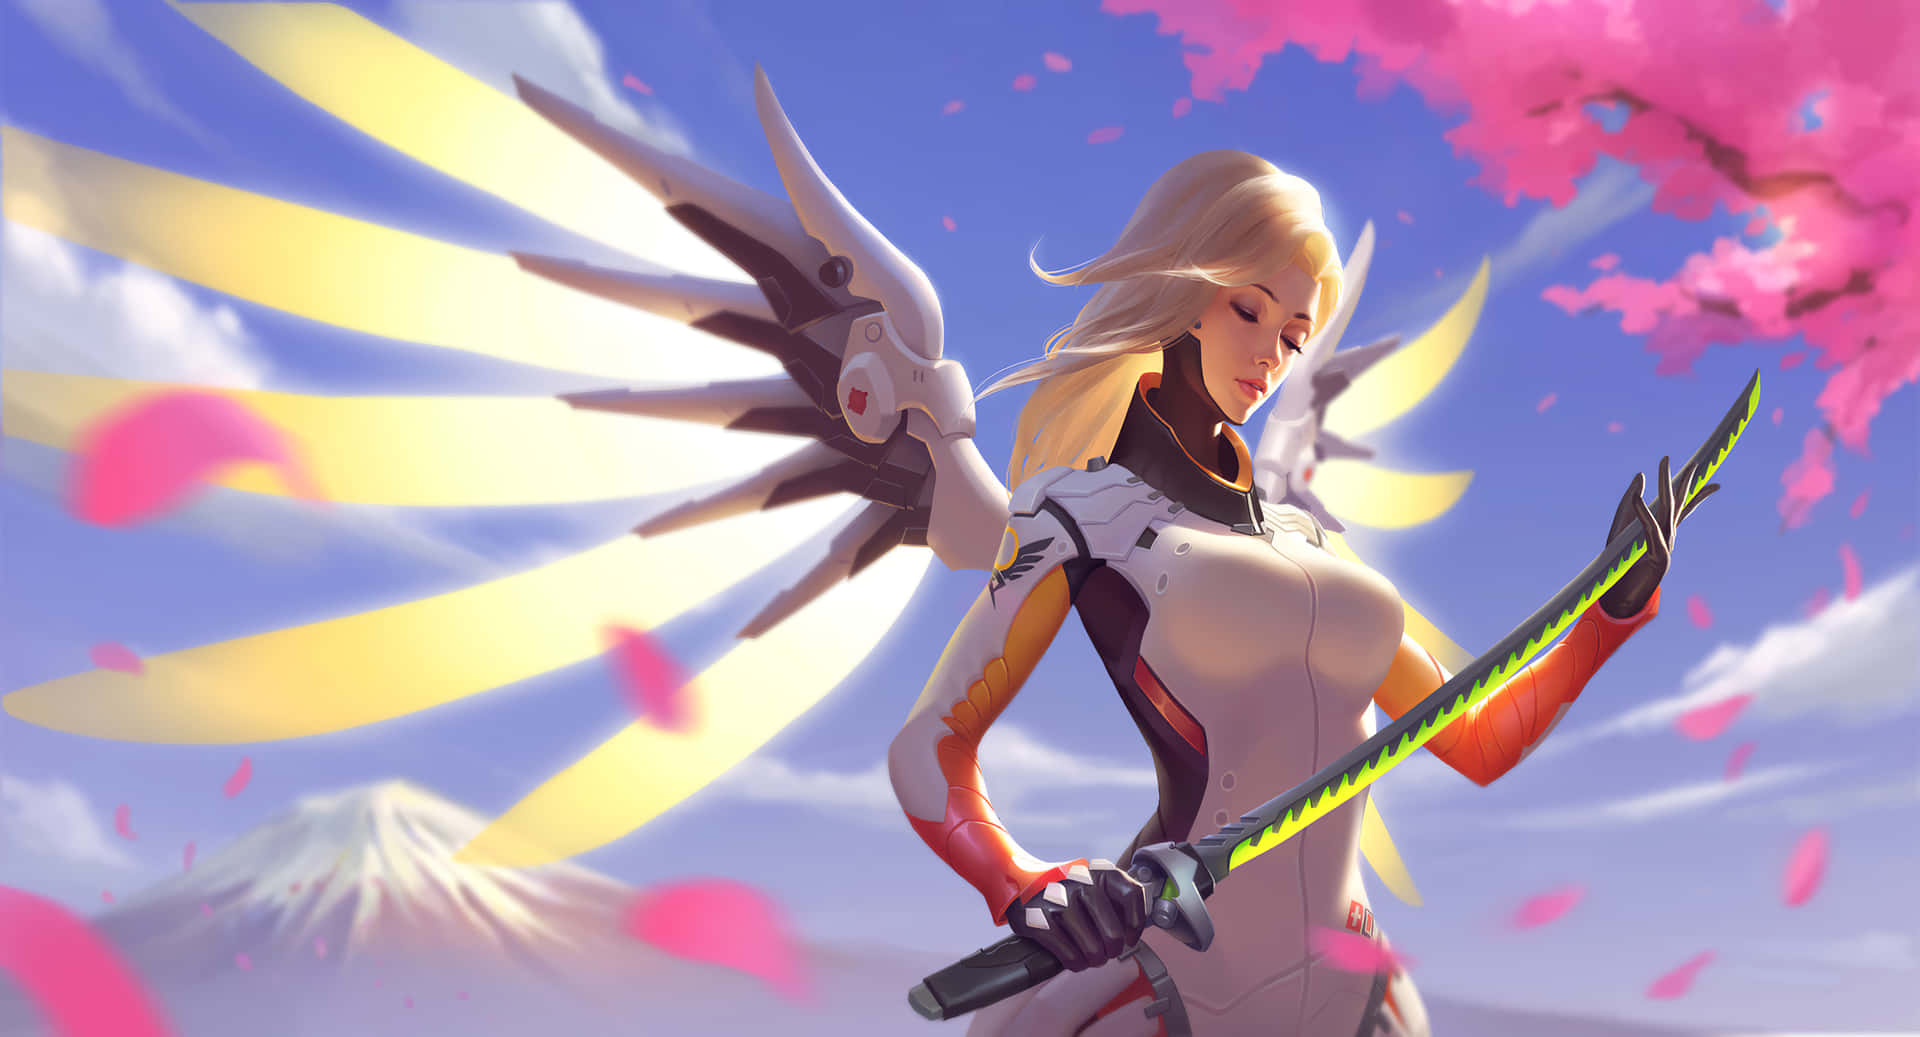 Valkyrie Rises - Overwatch Mercy in Action Wallpaper